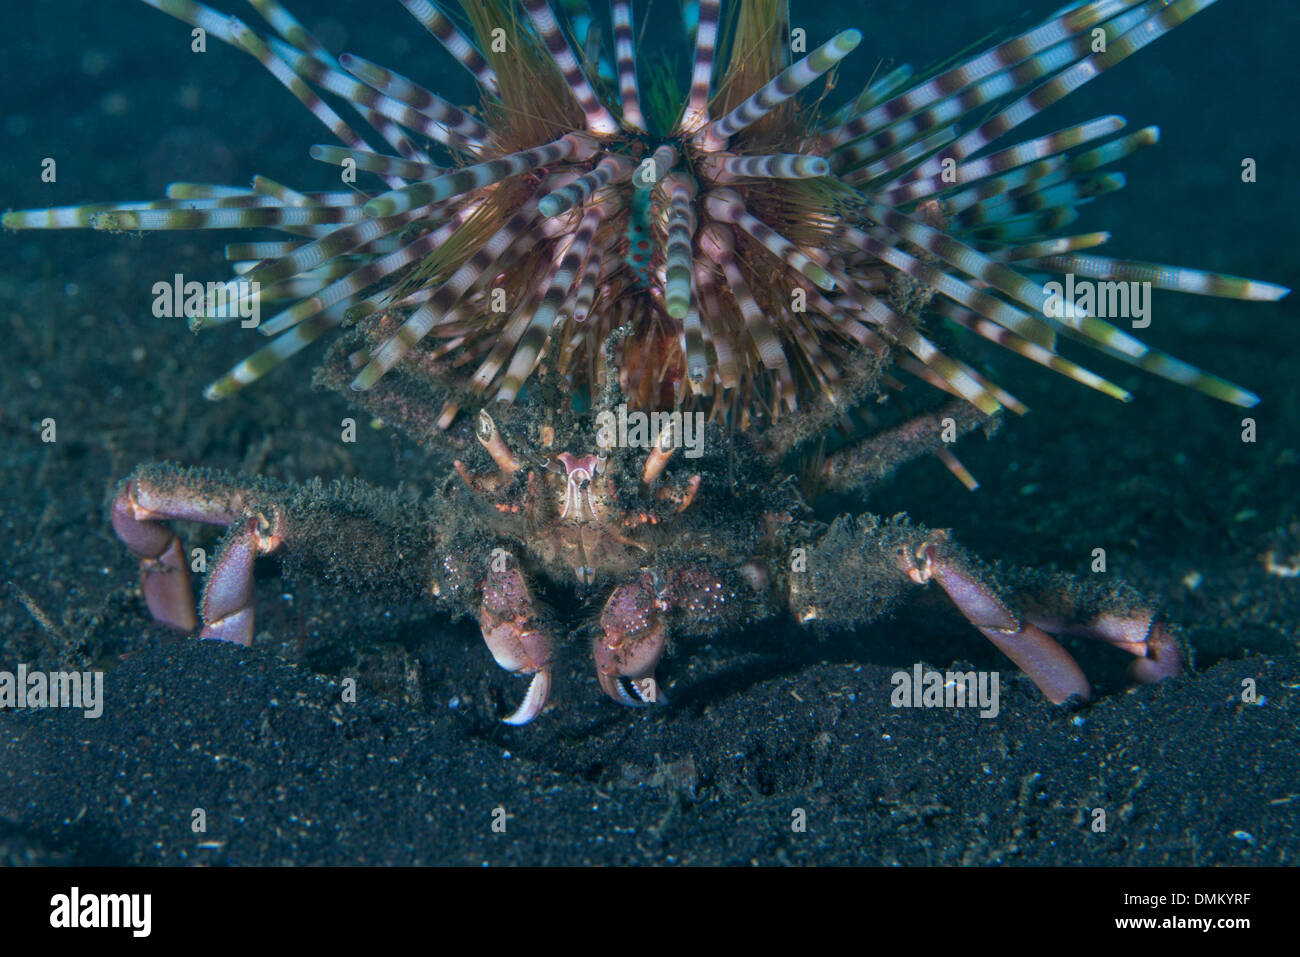 Carrier Crab with sea urchin. Lembeh Straits, Indonesia. Stock Photo